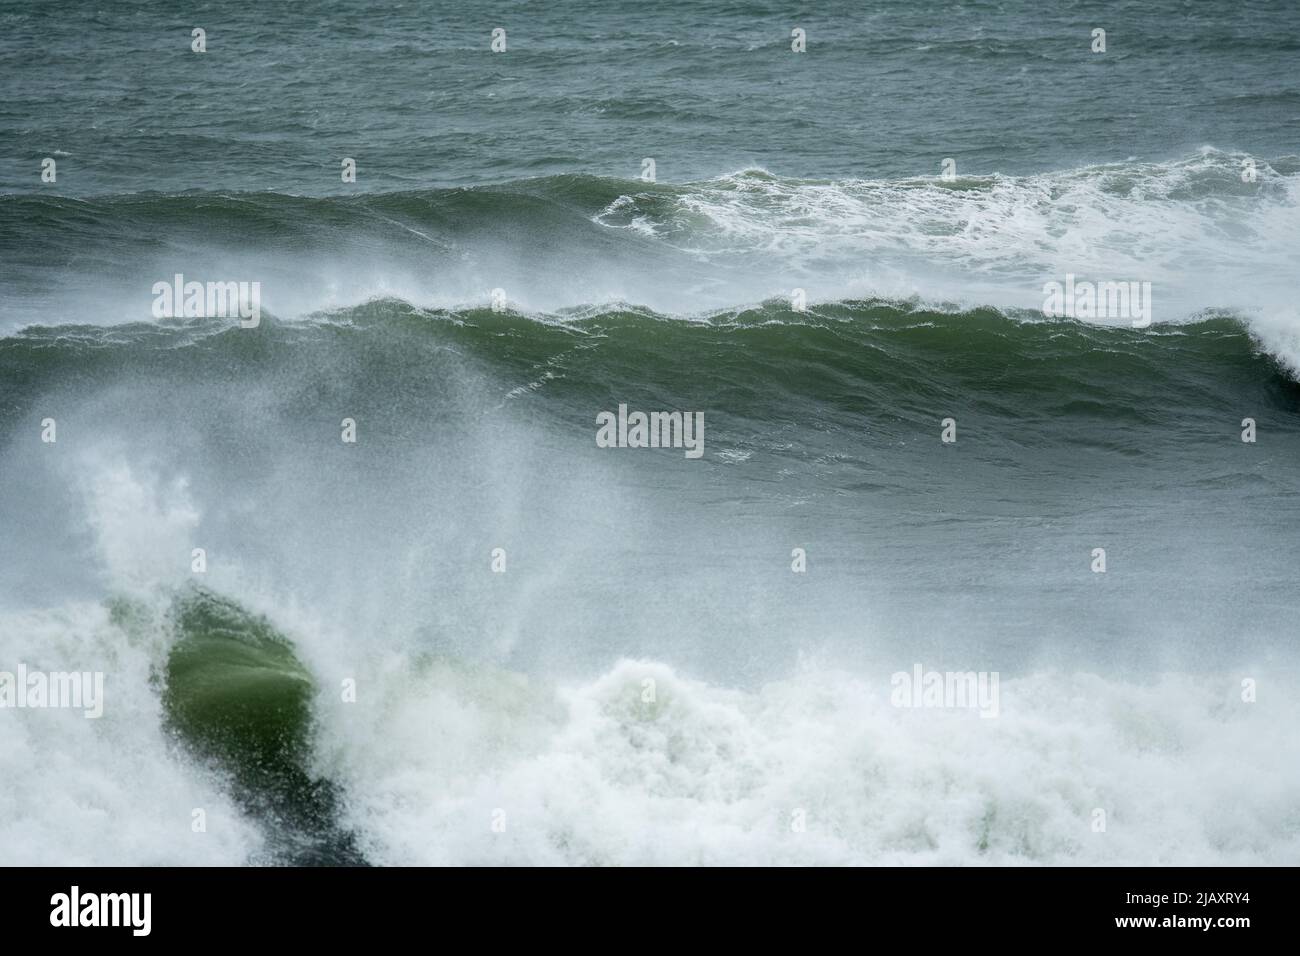 Stock photos of tropical storm Henri in 2021, Newport, RI. Stock photos of hurricane. Stock photos of extreme weather. Breaking Waves, Crashing Waves. Stock Photo